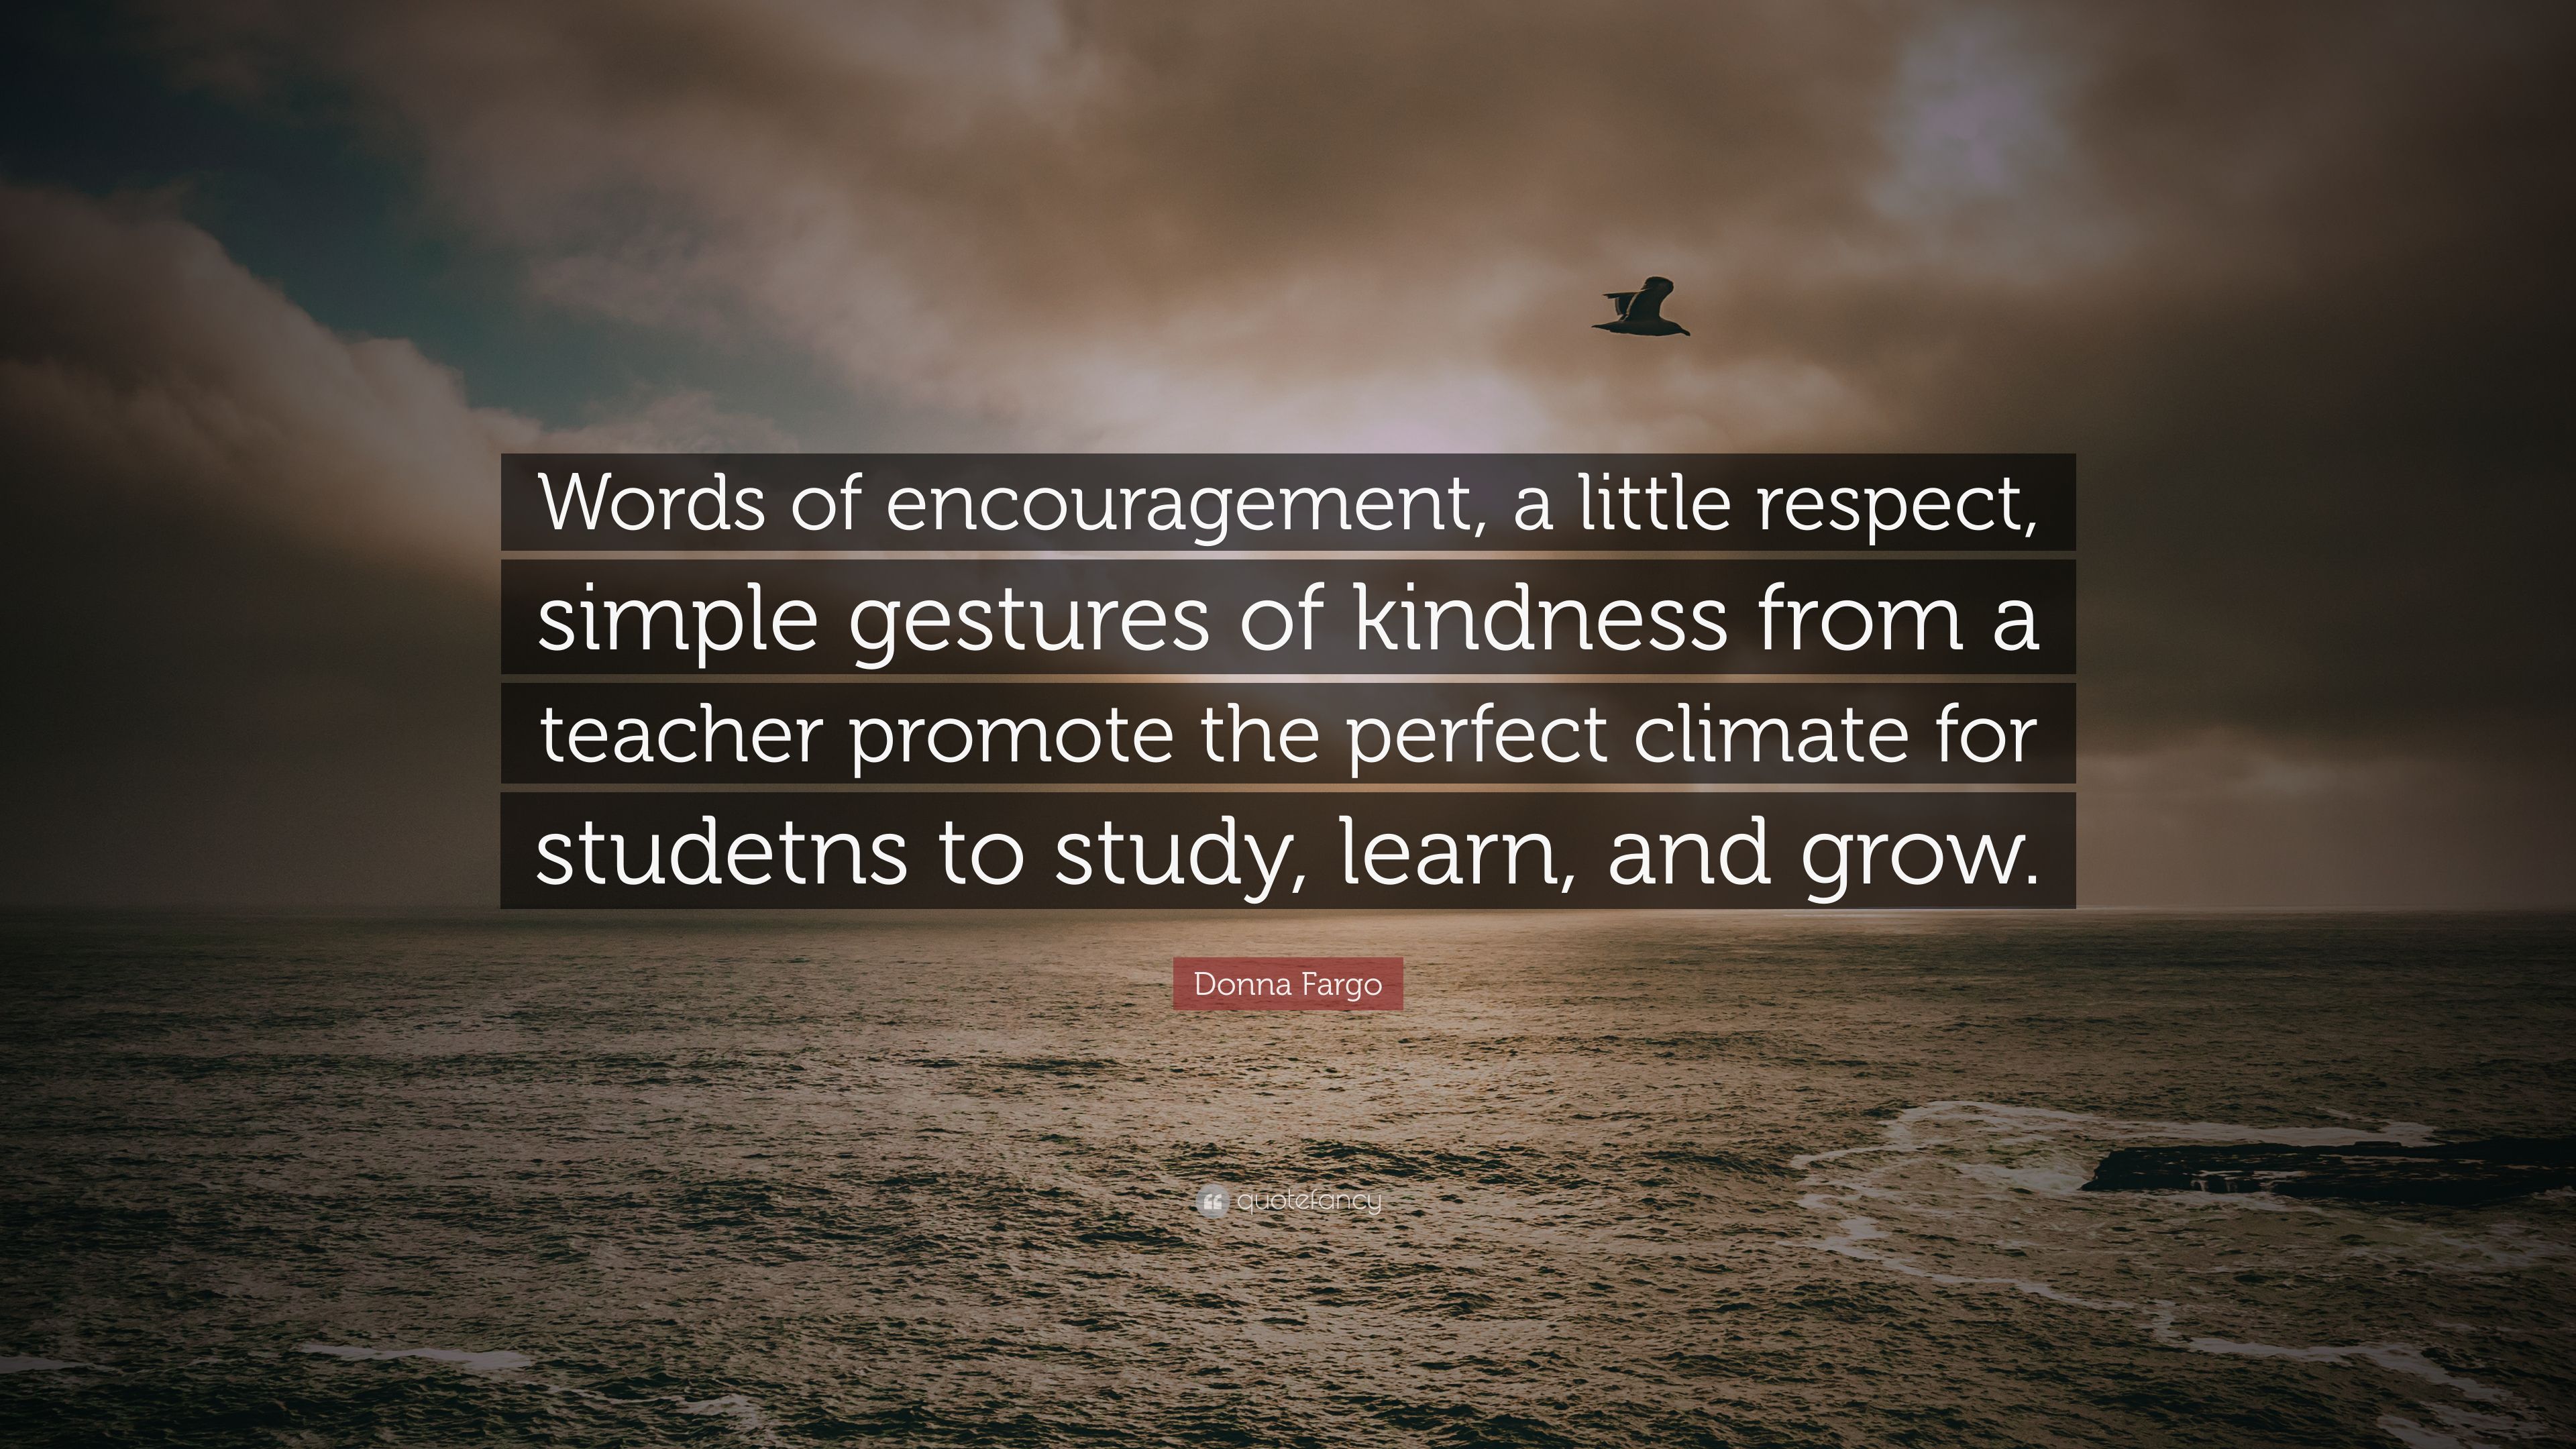 Donna Fargo Quote: “Words of encouragement, a little respect, simple gestures of kindness from a teacher promote the perfect climate for stu.” (7 wallpaper)